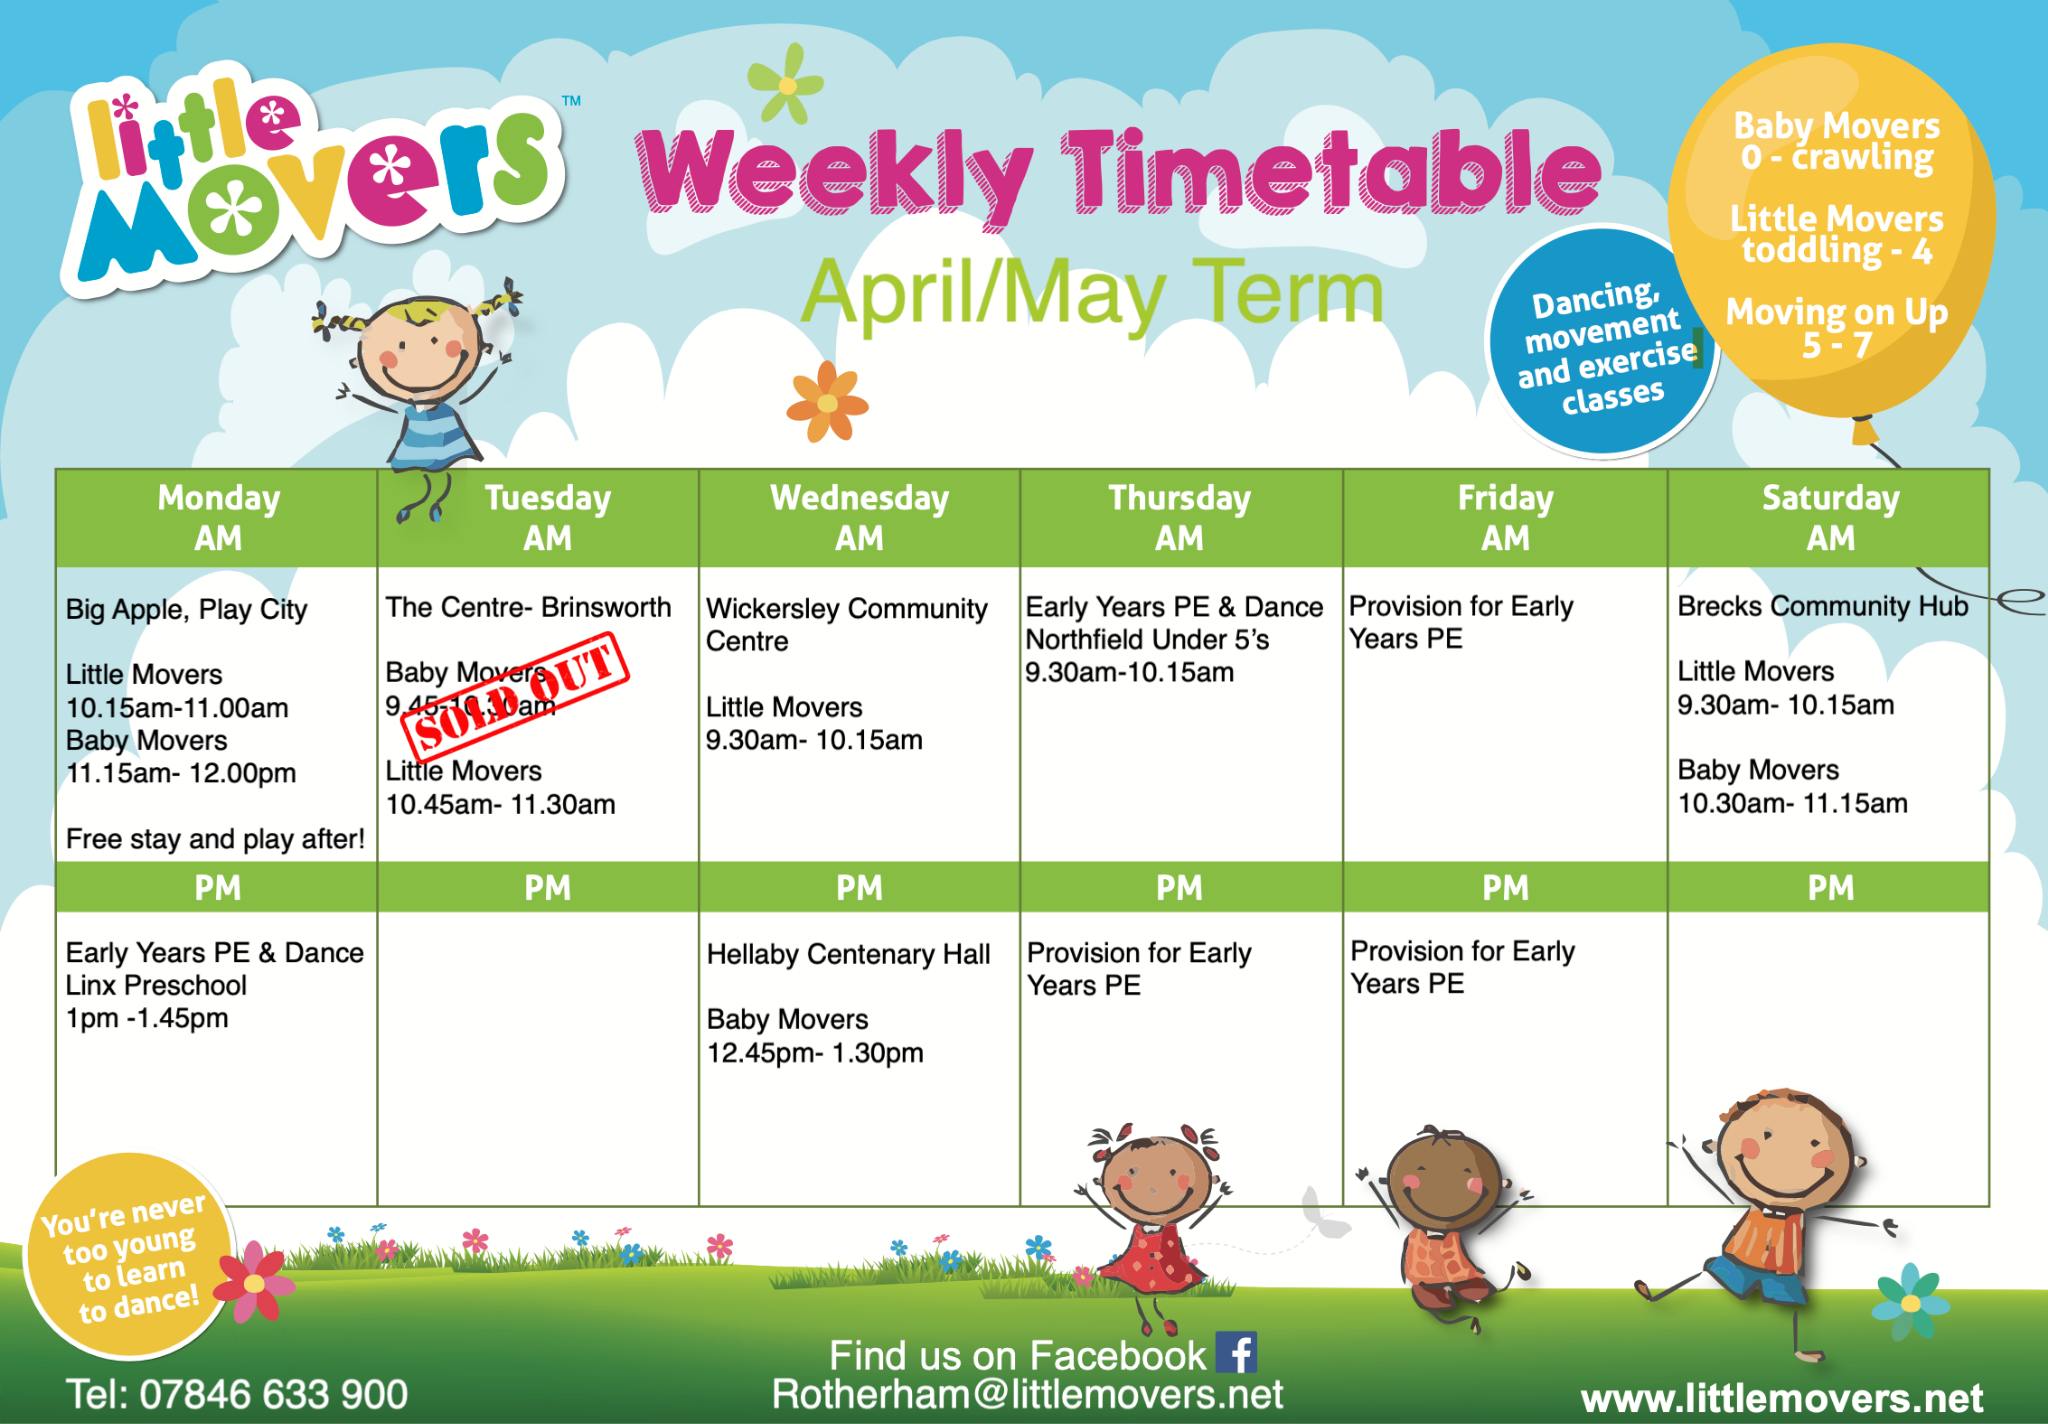 timetable showing the baby & toddler classes available in Rotherham